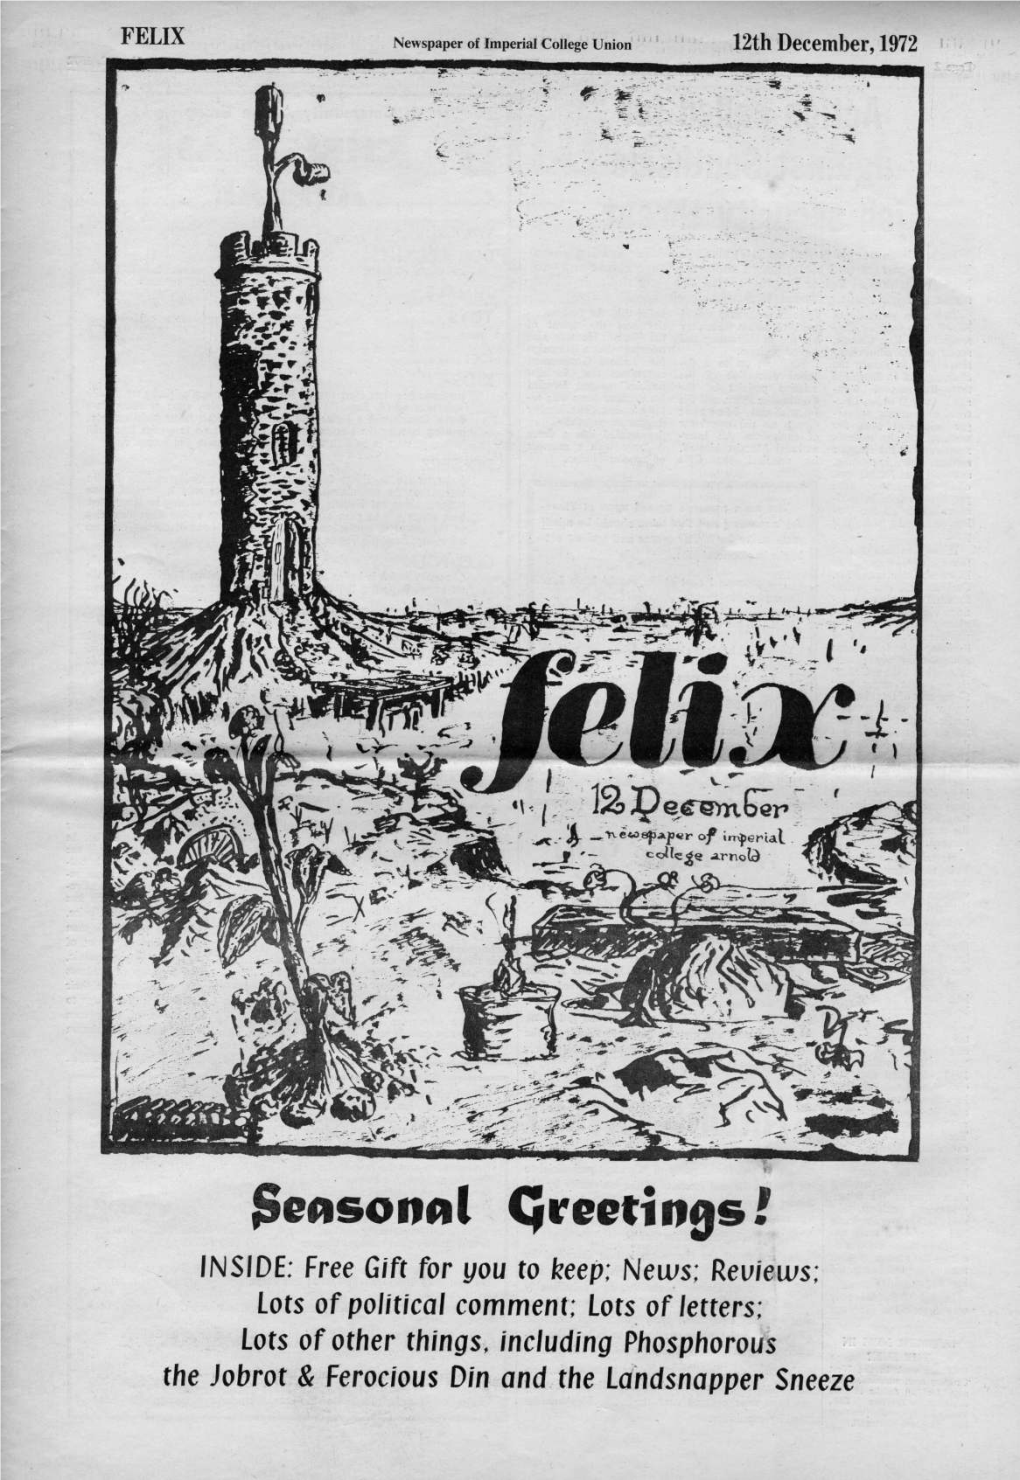 FELIX Newspaper of Imperial College Union 12Th December, 1972